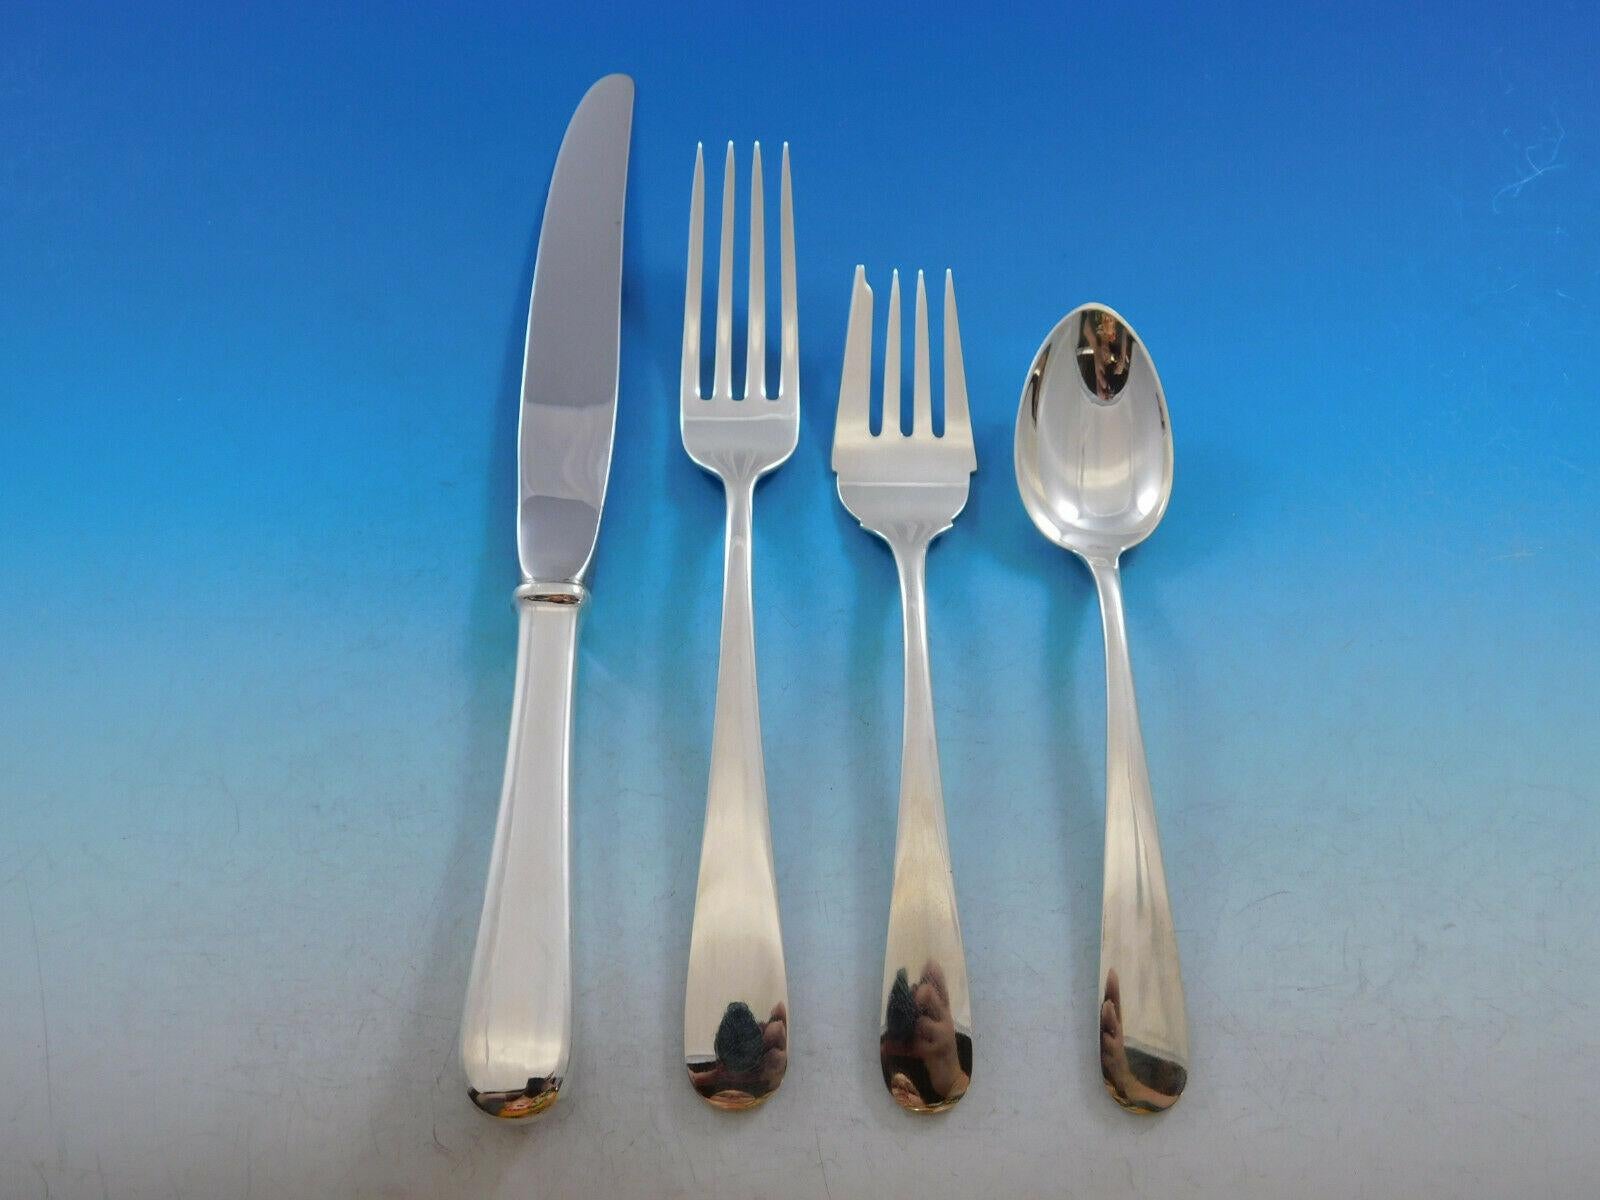 Old Maryland plain by Kirk Sterling Silver flatware set, 67 pieces. This set includes:

12 knives, 8 7/8